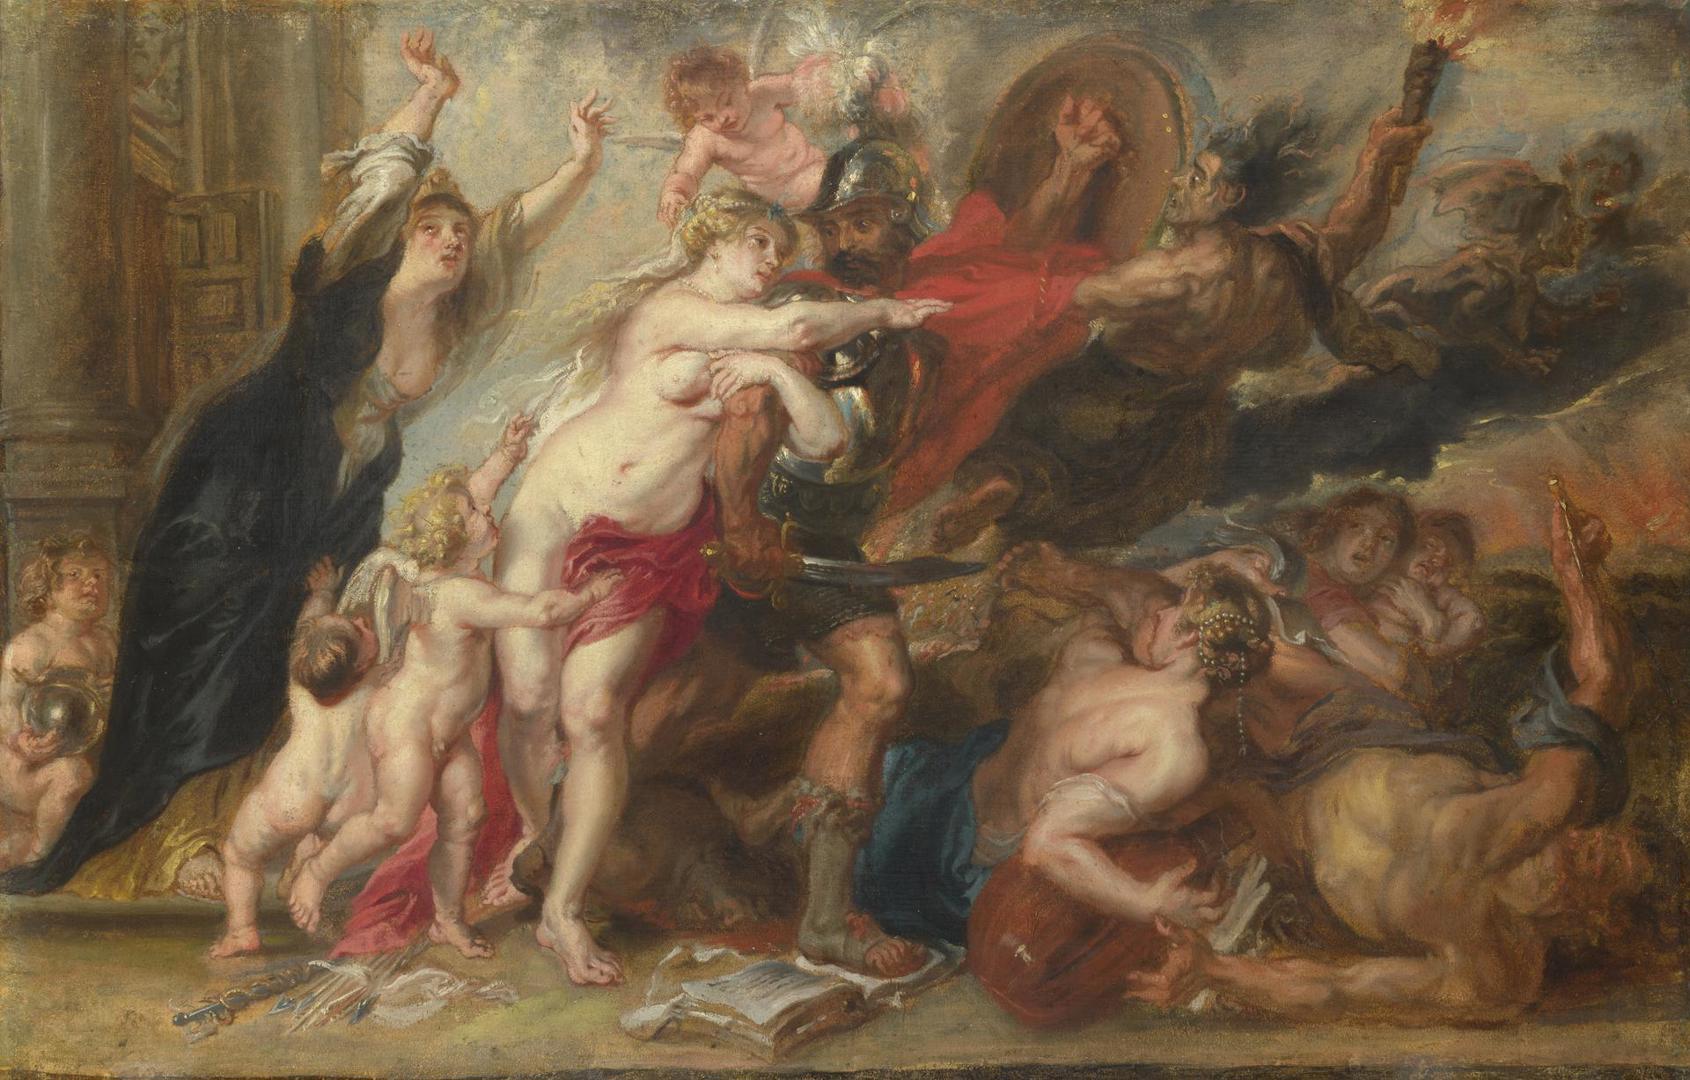 The Horrors of War by After Peter Paul Rubens